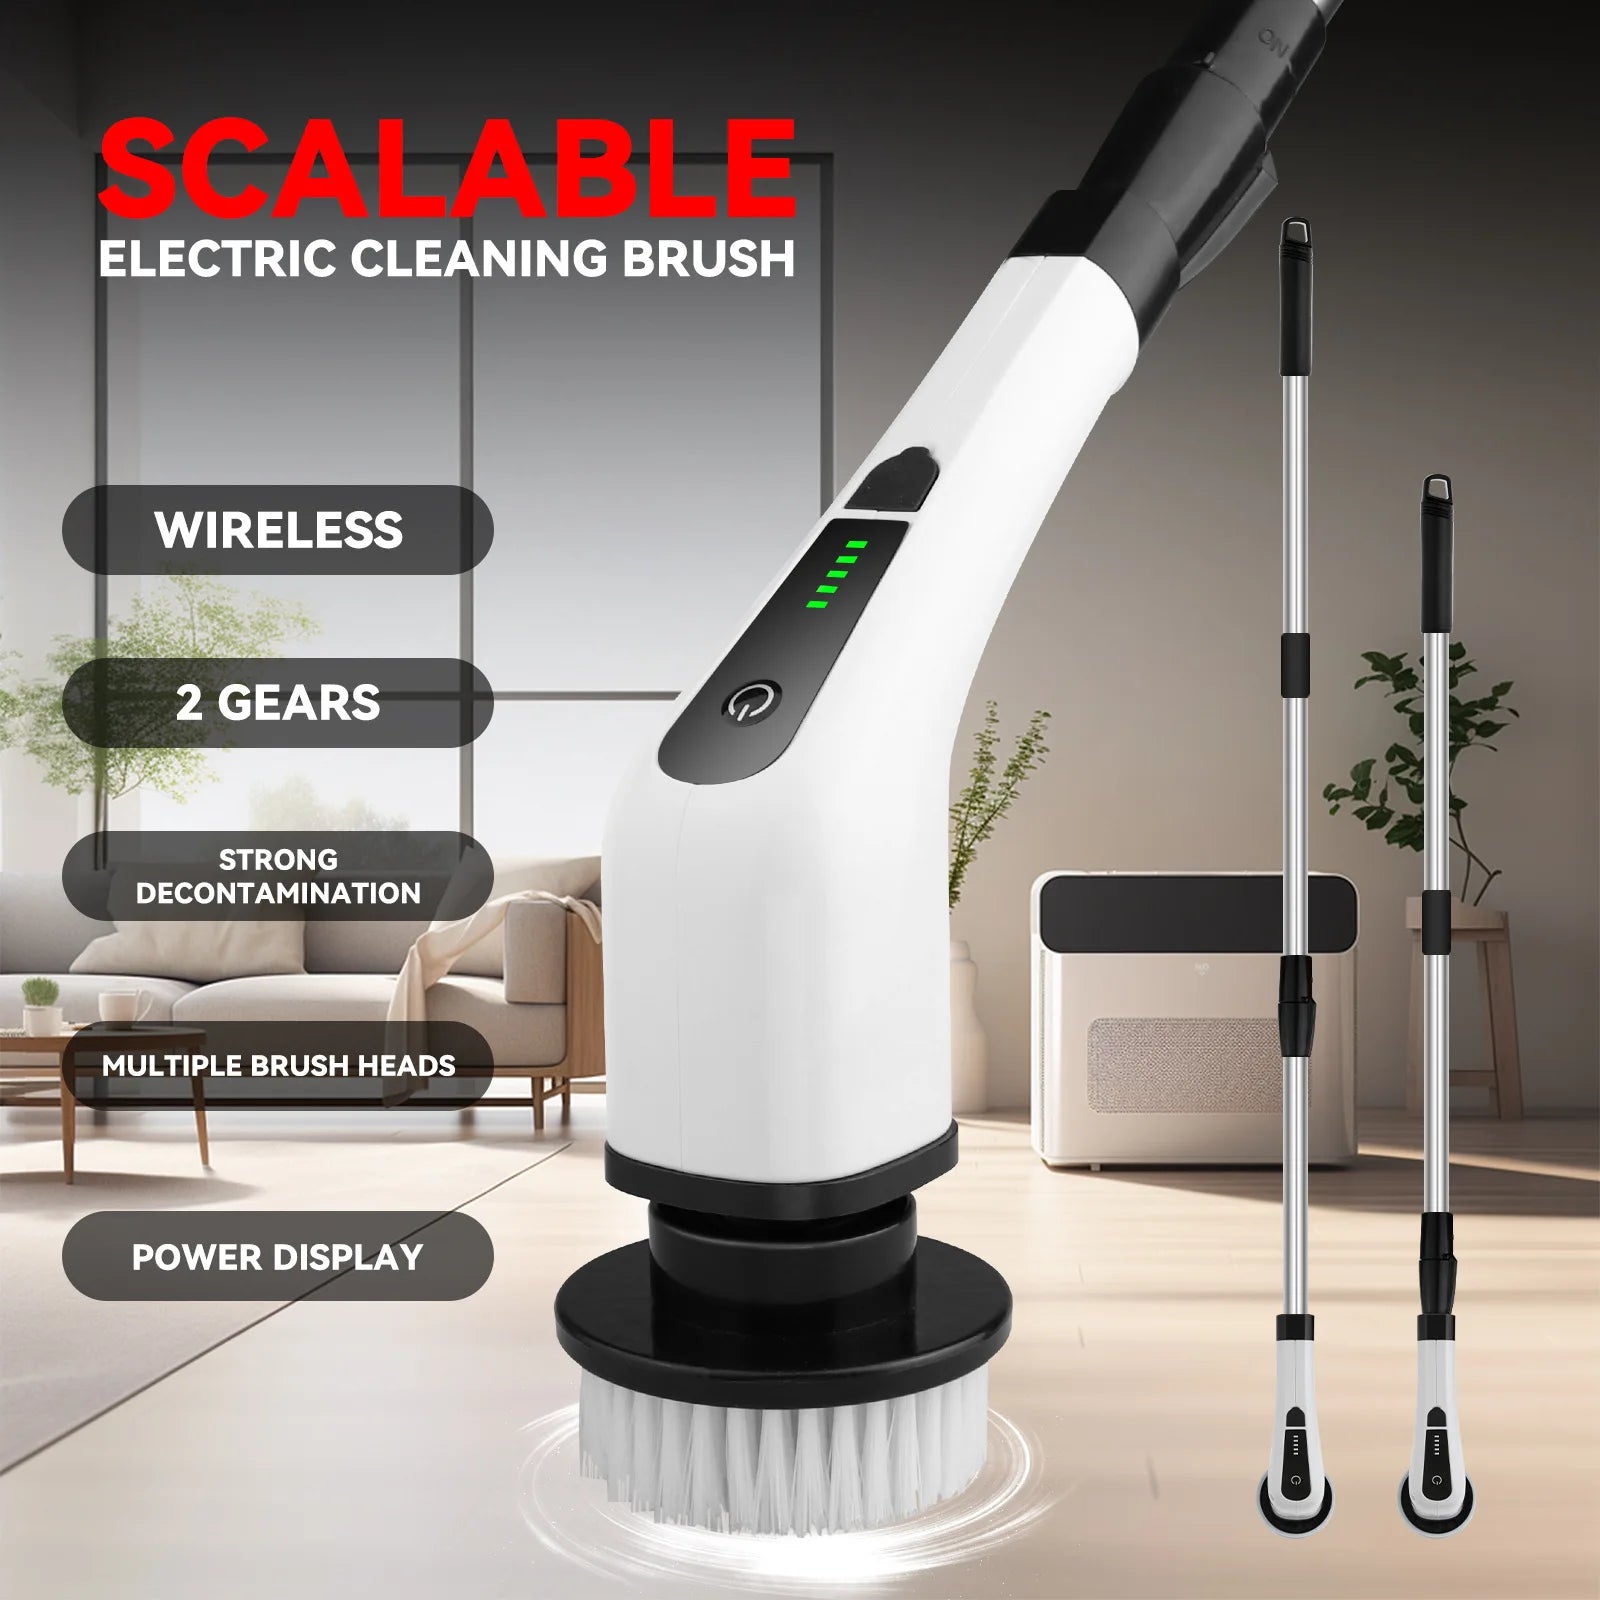 New Electric Cleaning Brush Window Wall Cleaner Electric Turbo Scrub Brush Rotating Scrubber Kitchen Bathroom Cleaning Tools